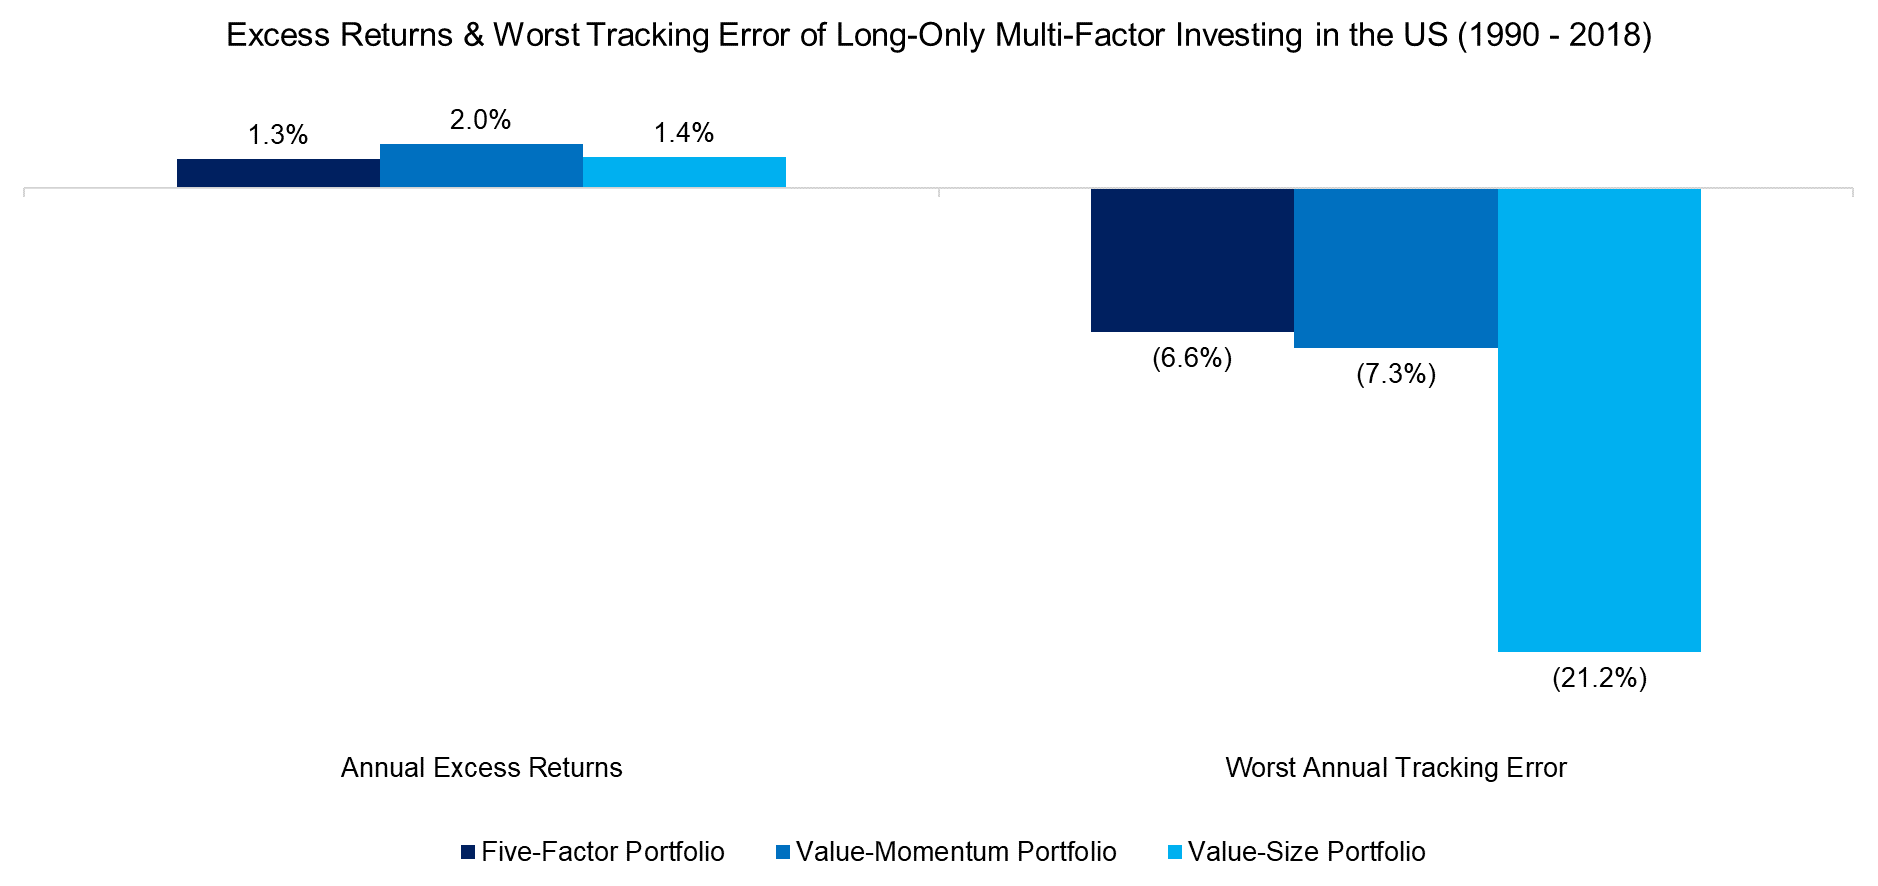 Excess Returns & Worst Tracking Error of Long-Only Multi-Factor Investing